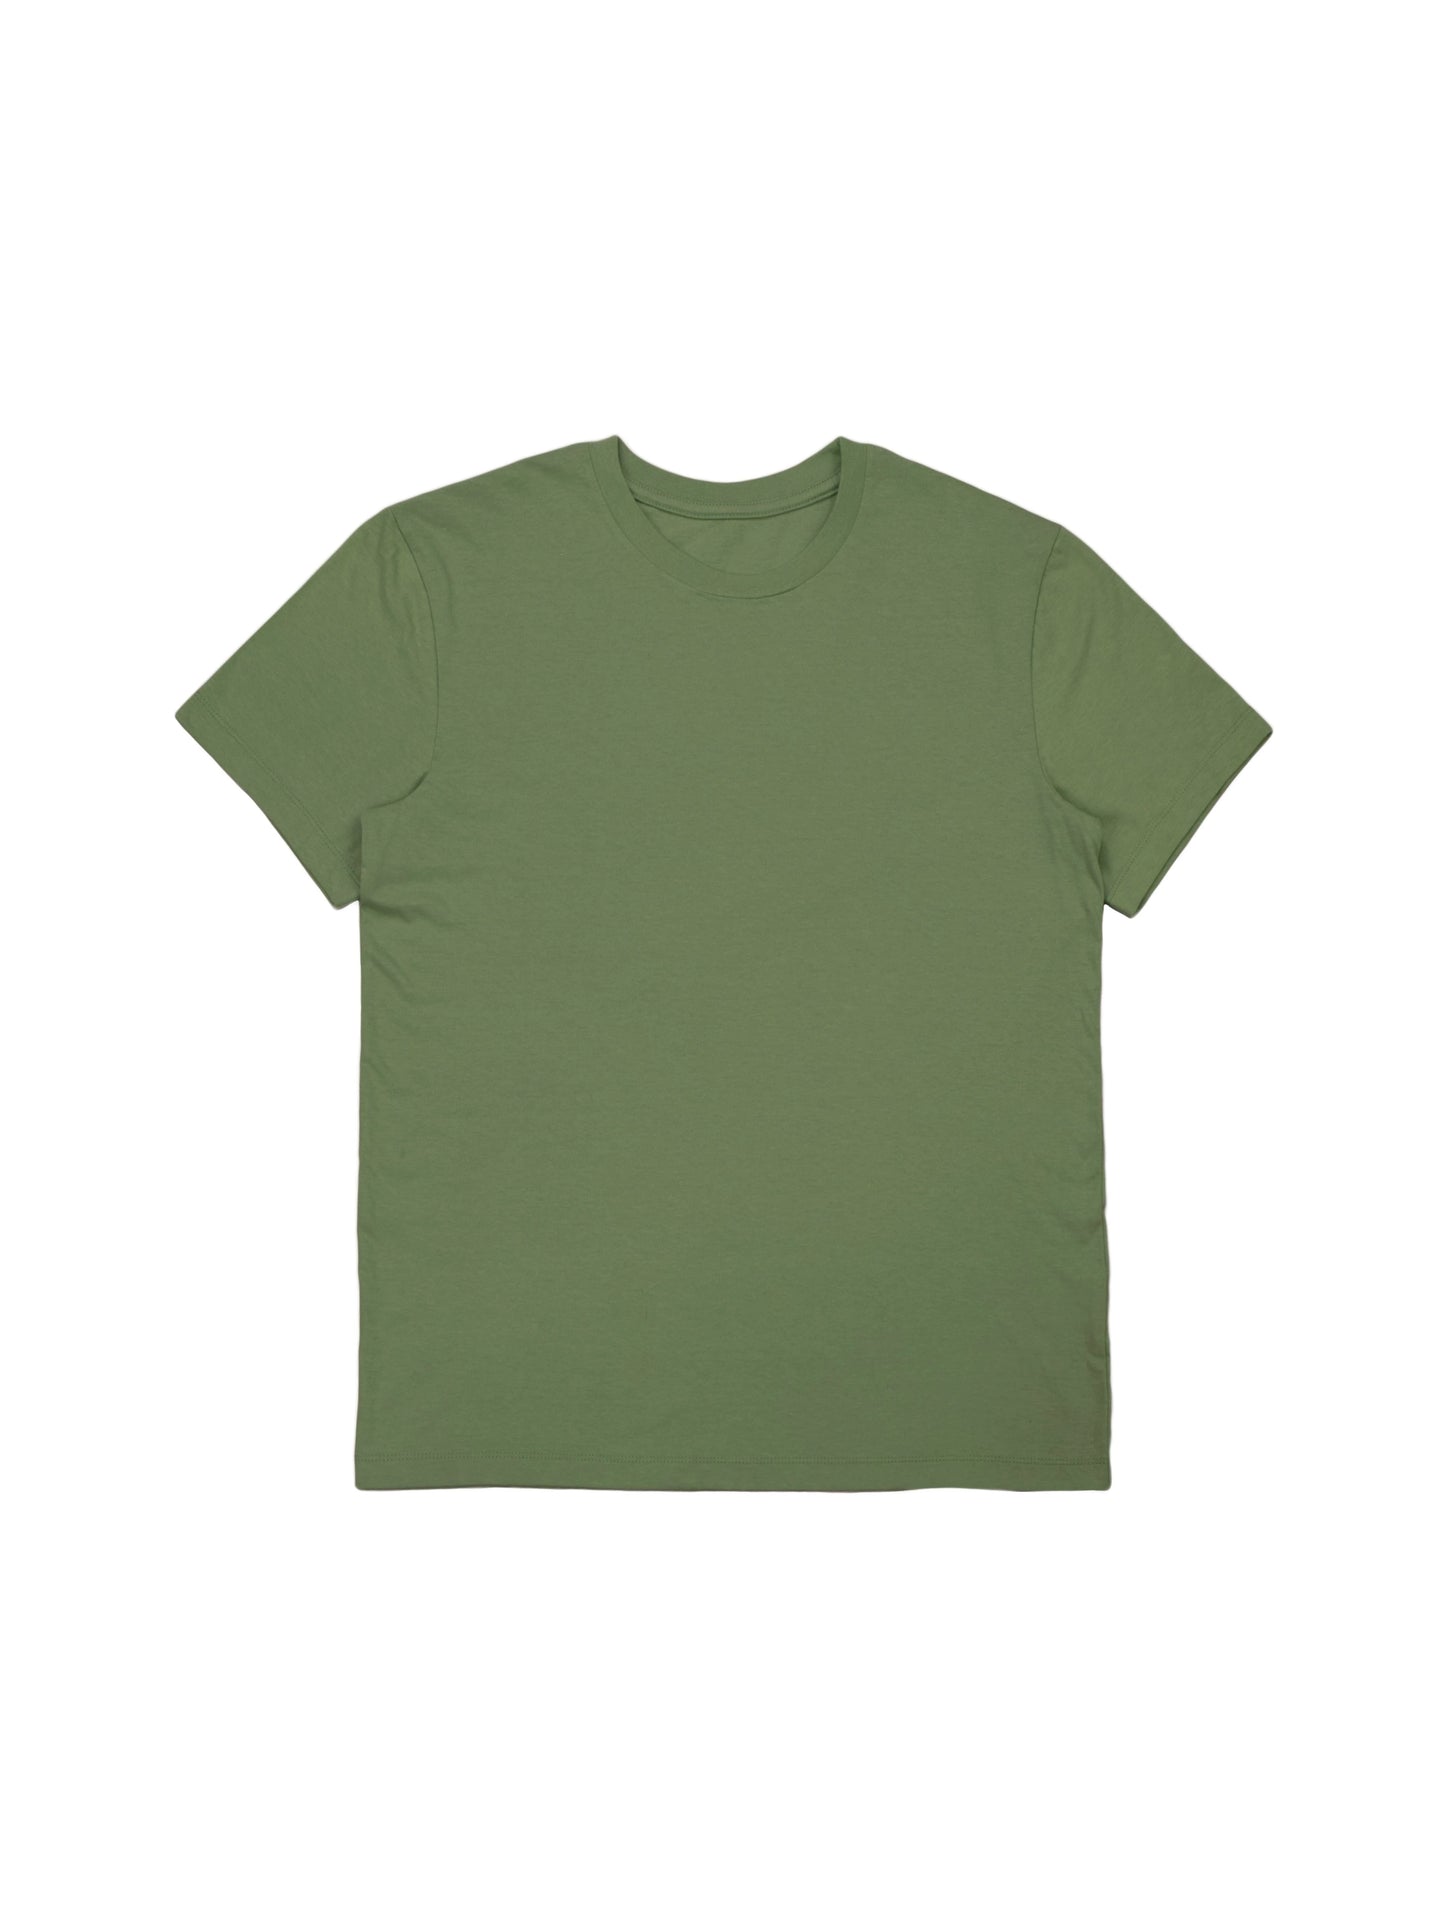 Olive Green T-Shirt in Trendy Boxy Fit.